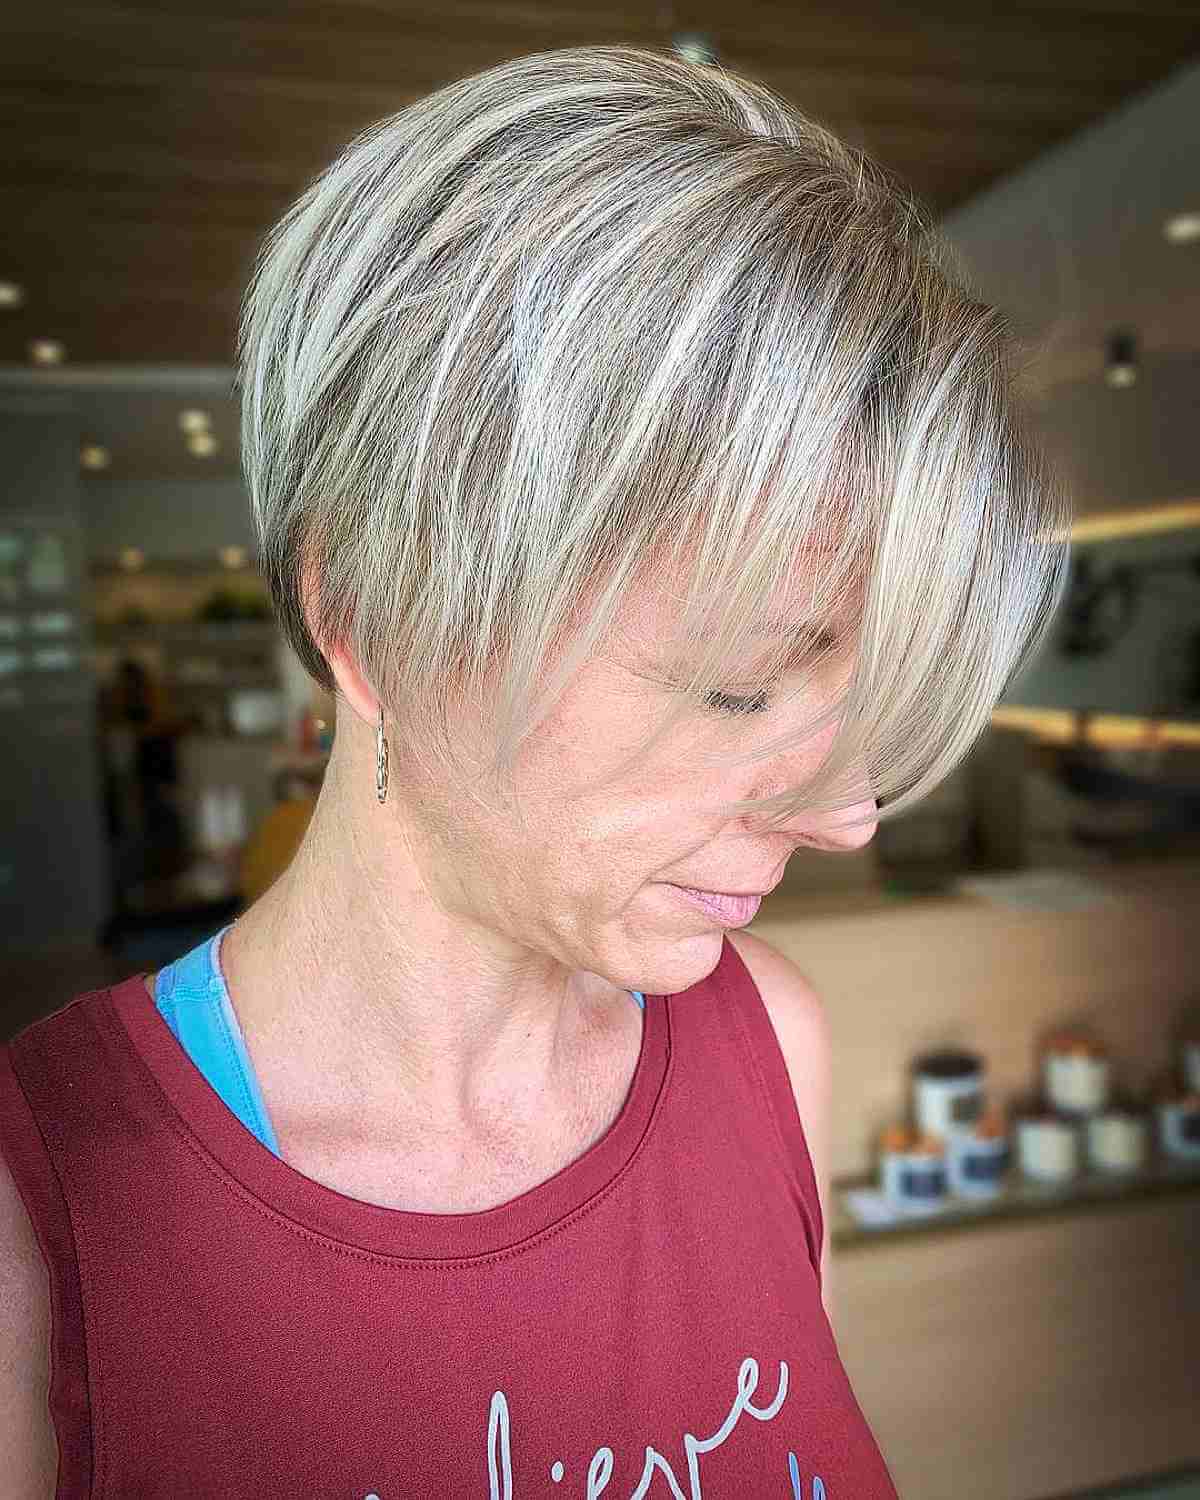 Platinum Blonde on a Long Pixie Hair for Women in Their 40s